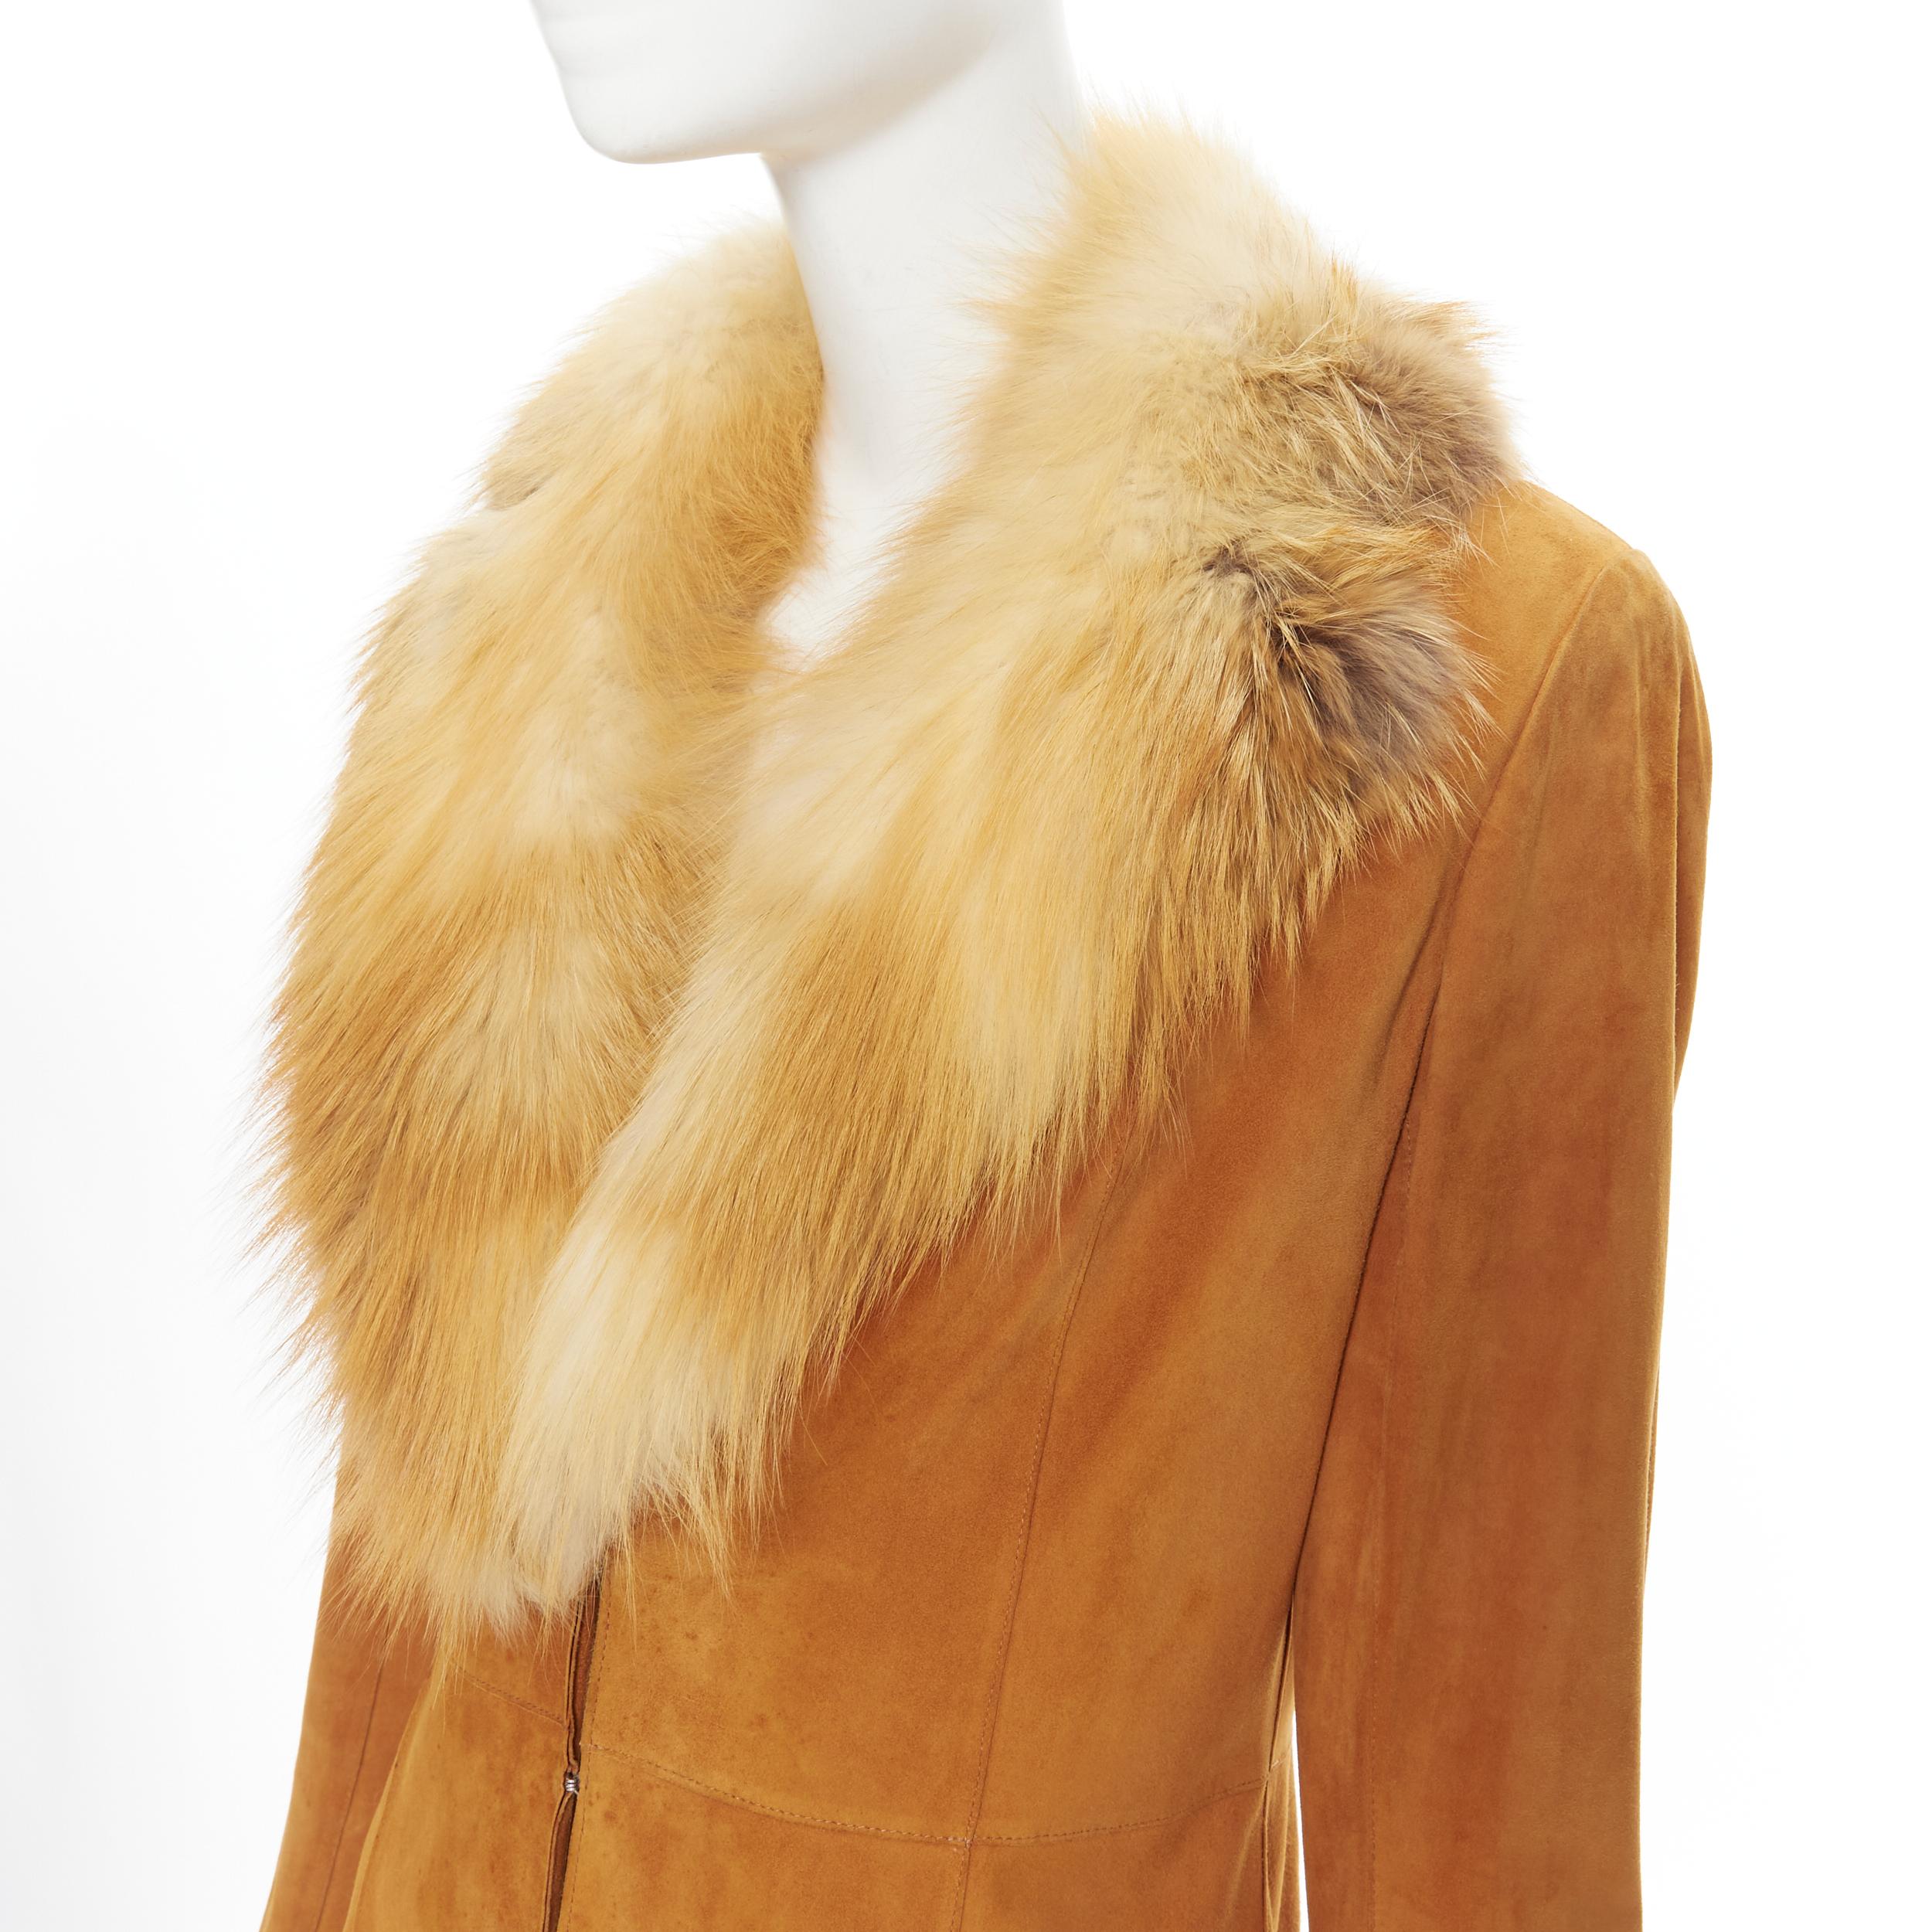 vintage CHRISTIAN DIOR JOHN GALLIANO tan brown suede fox collar jacket FR40 M Reference: GIYG/A00003 
Brand: Christian Dior 
Designer: John Galliano 
Material: Suede 
Color: Brown 
Pattern: Solid 
Closure: Hook & Eye 
Extra Detail: Tan brown suede